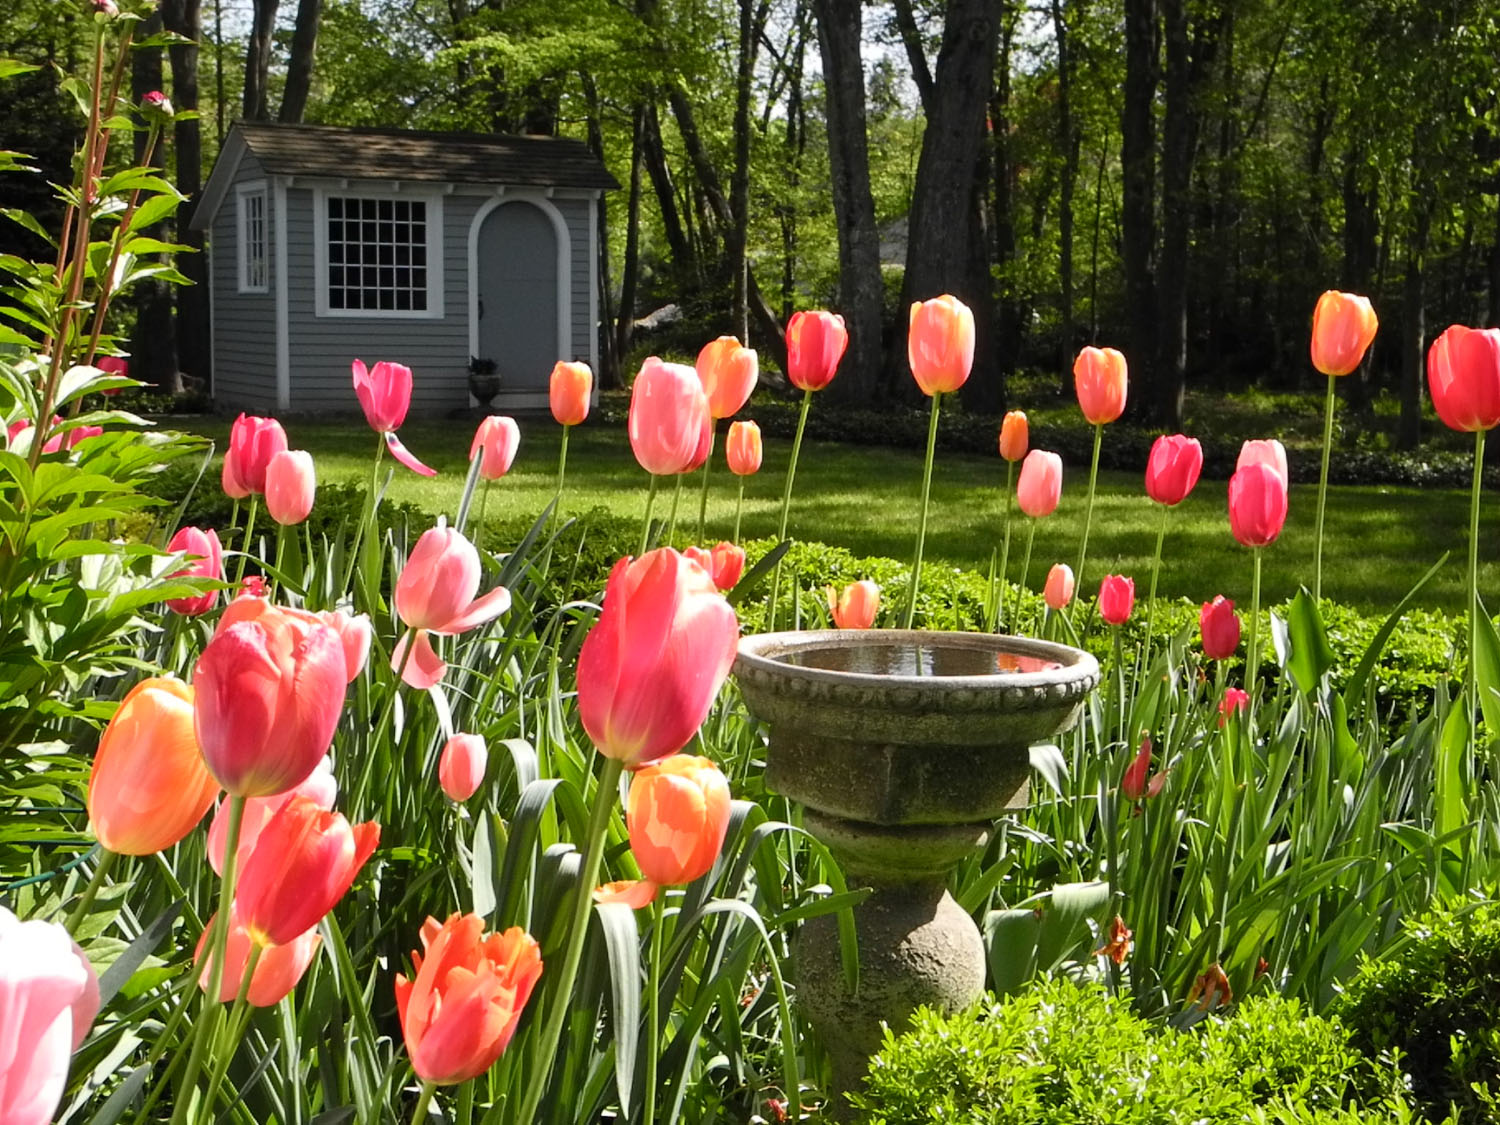 A lush garden with vibrant pink and orange tulips, a stone birdbath in the foreground, and a quaint grey shed in the background.